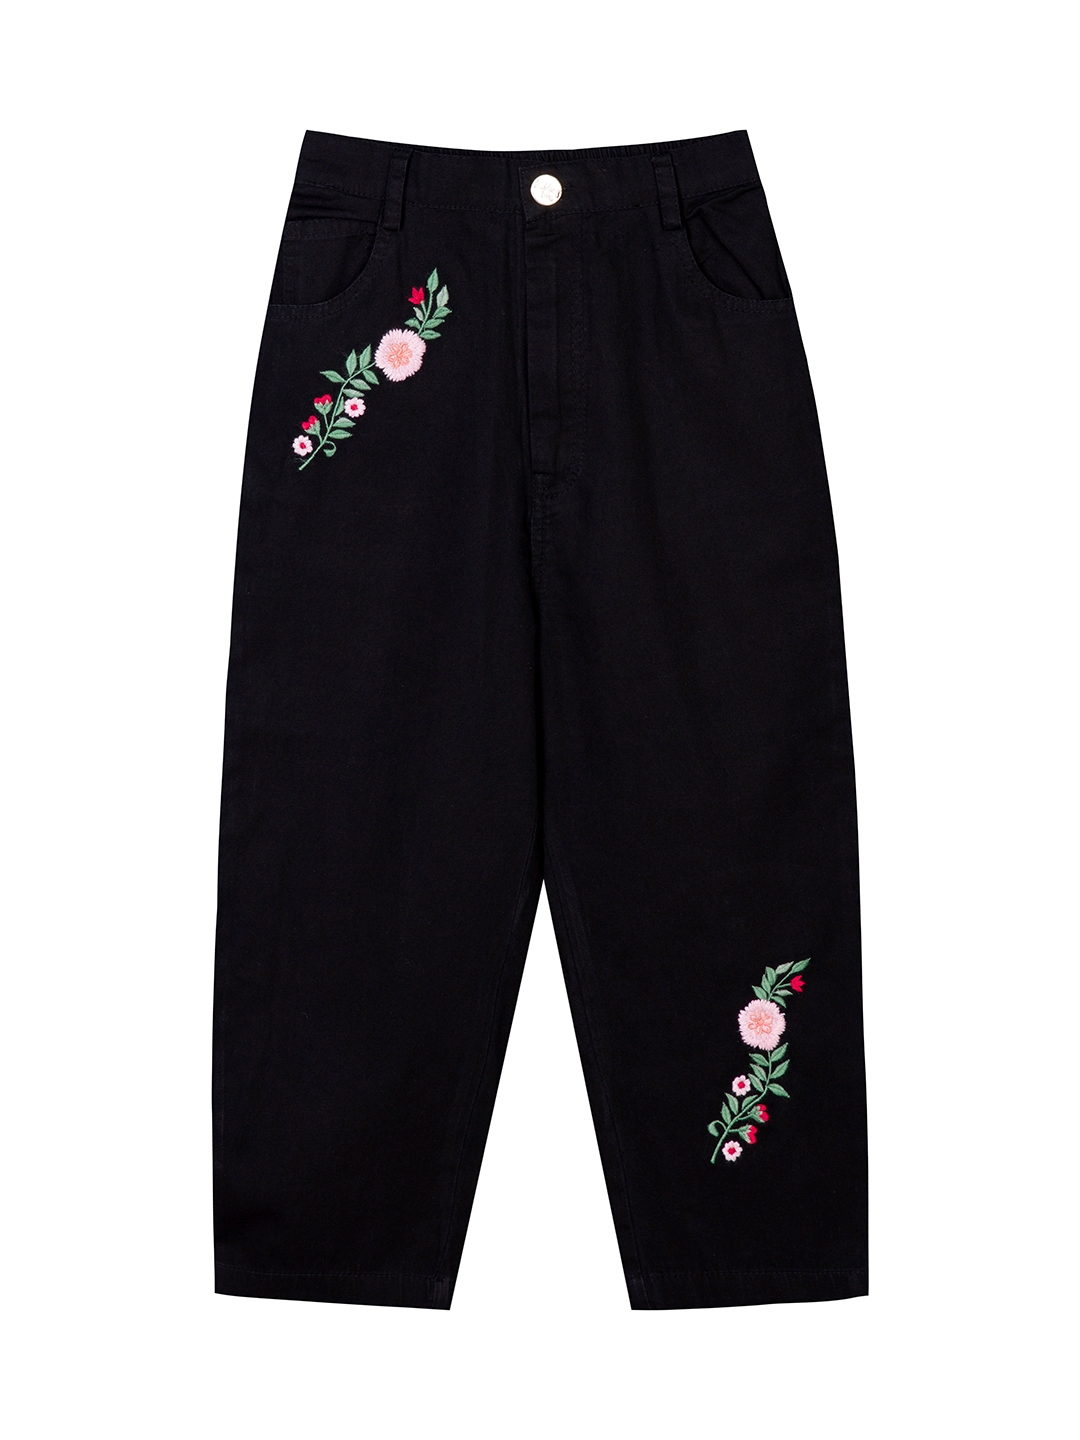 Budding Bees Girls Denim With Embroidered Jeans-Black